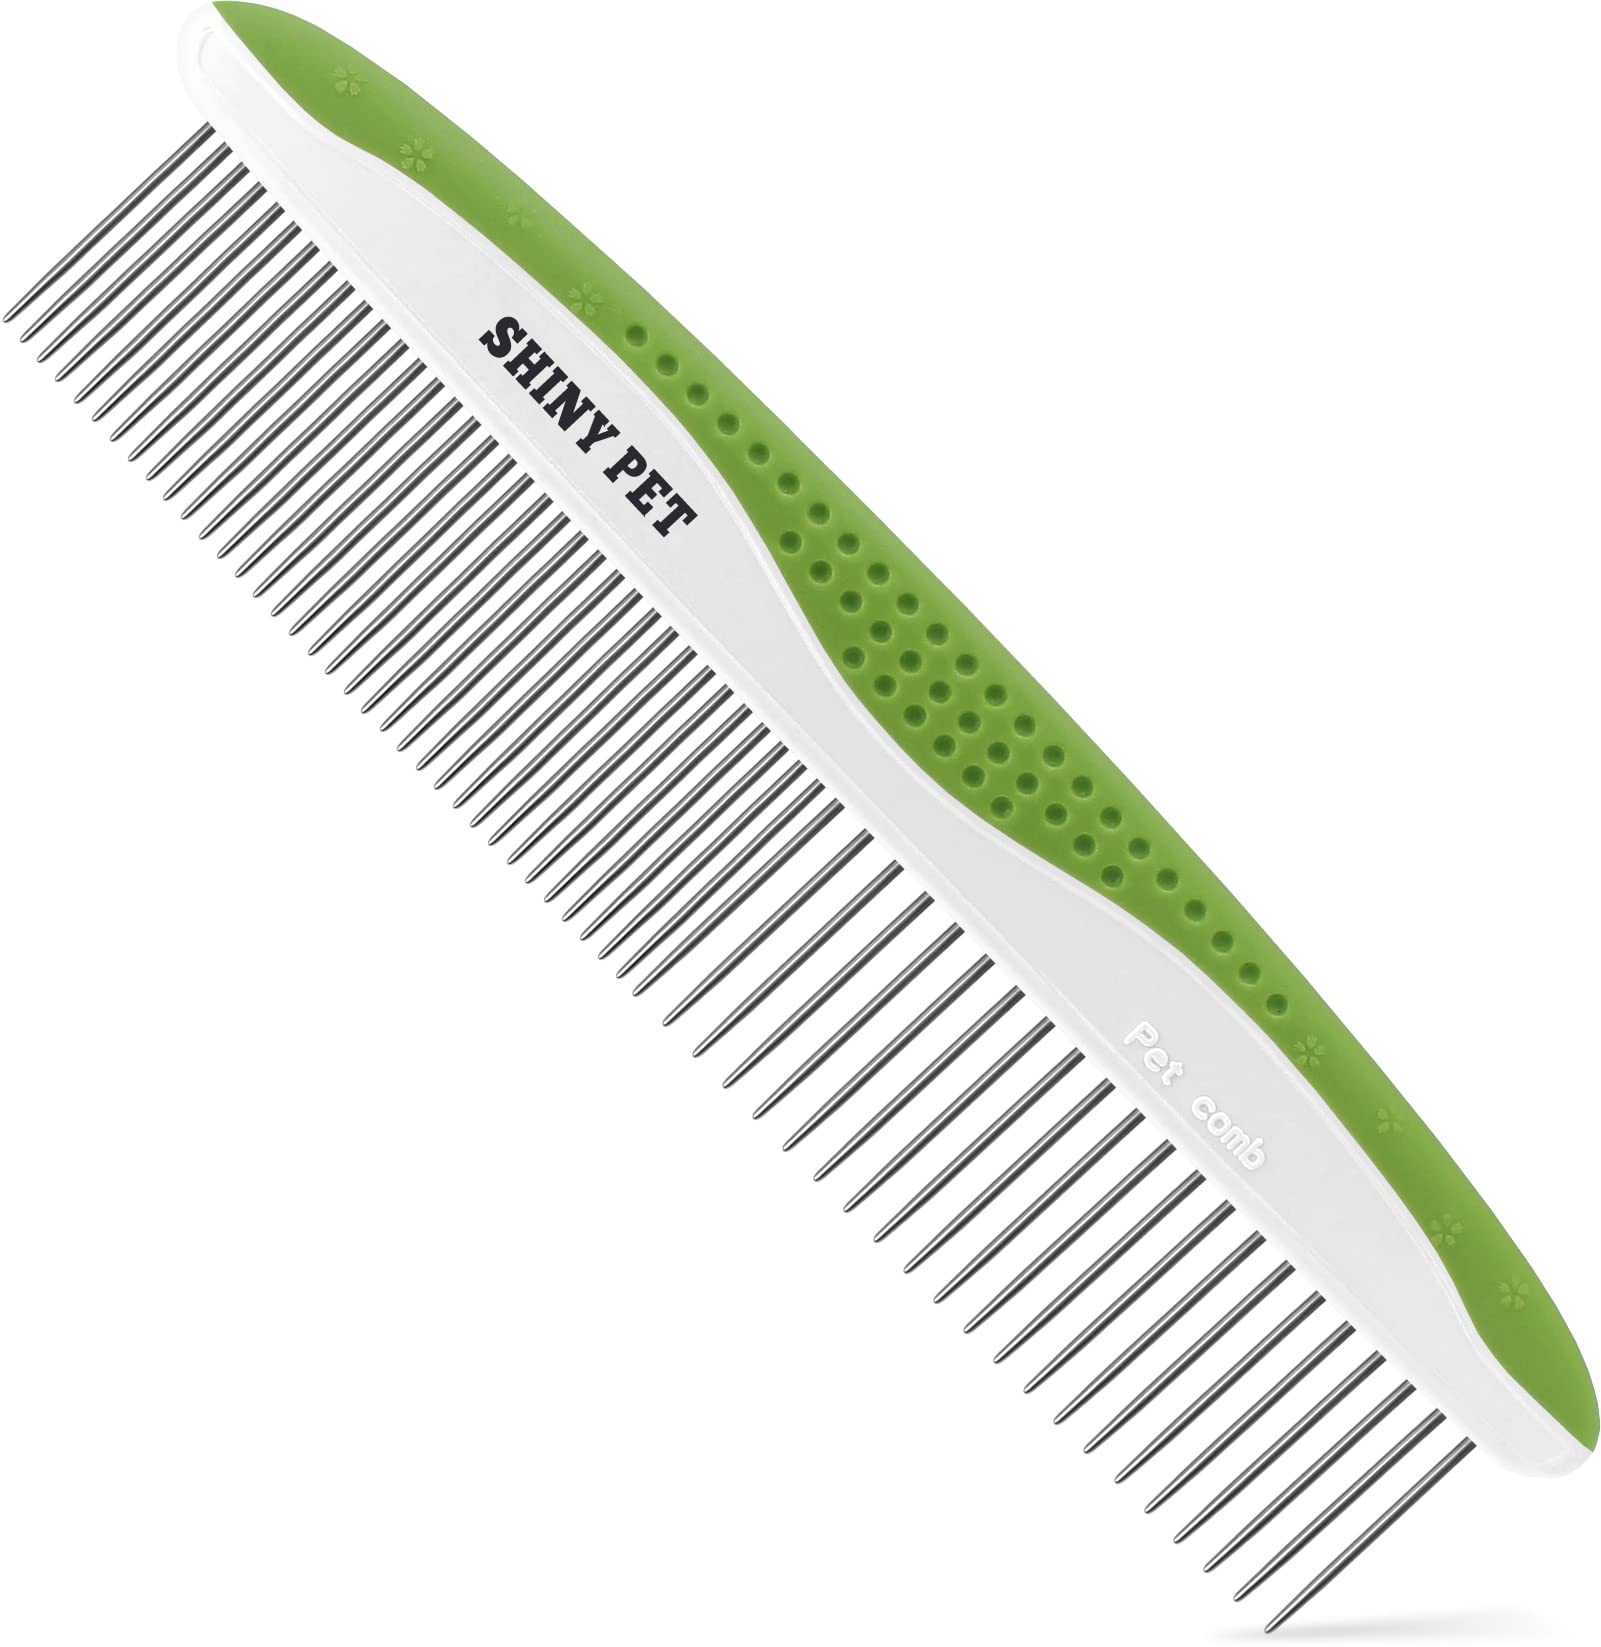 Book Cover Dog Comb for Removes Tangles and Knots - Cat Comb for Removing Matted Fur - Grooming Tool with Stainless Steel Teeth and Non-Slip Grip Handle - Best Pet Hair Comb for Home Grooming Kit - Ebook Guide